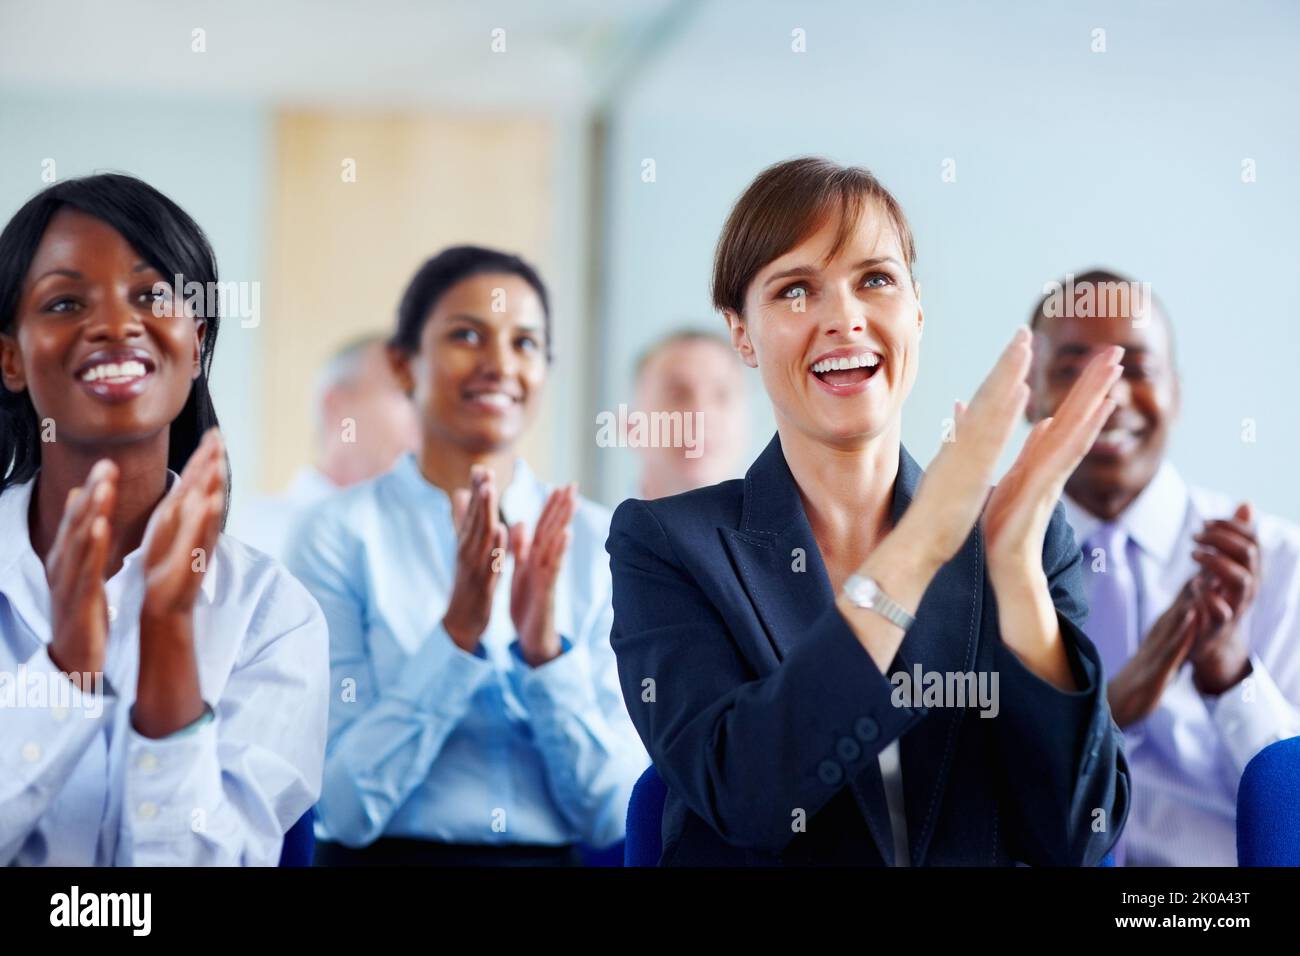 Group of colleagues applauding. View of group of executives applauding. Stock Photo